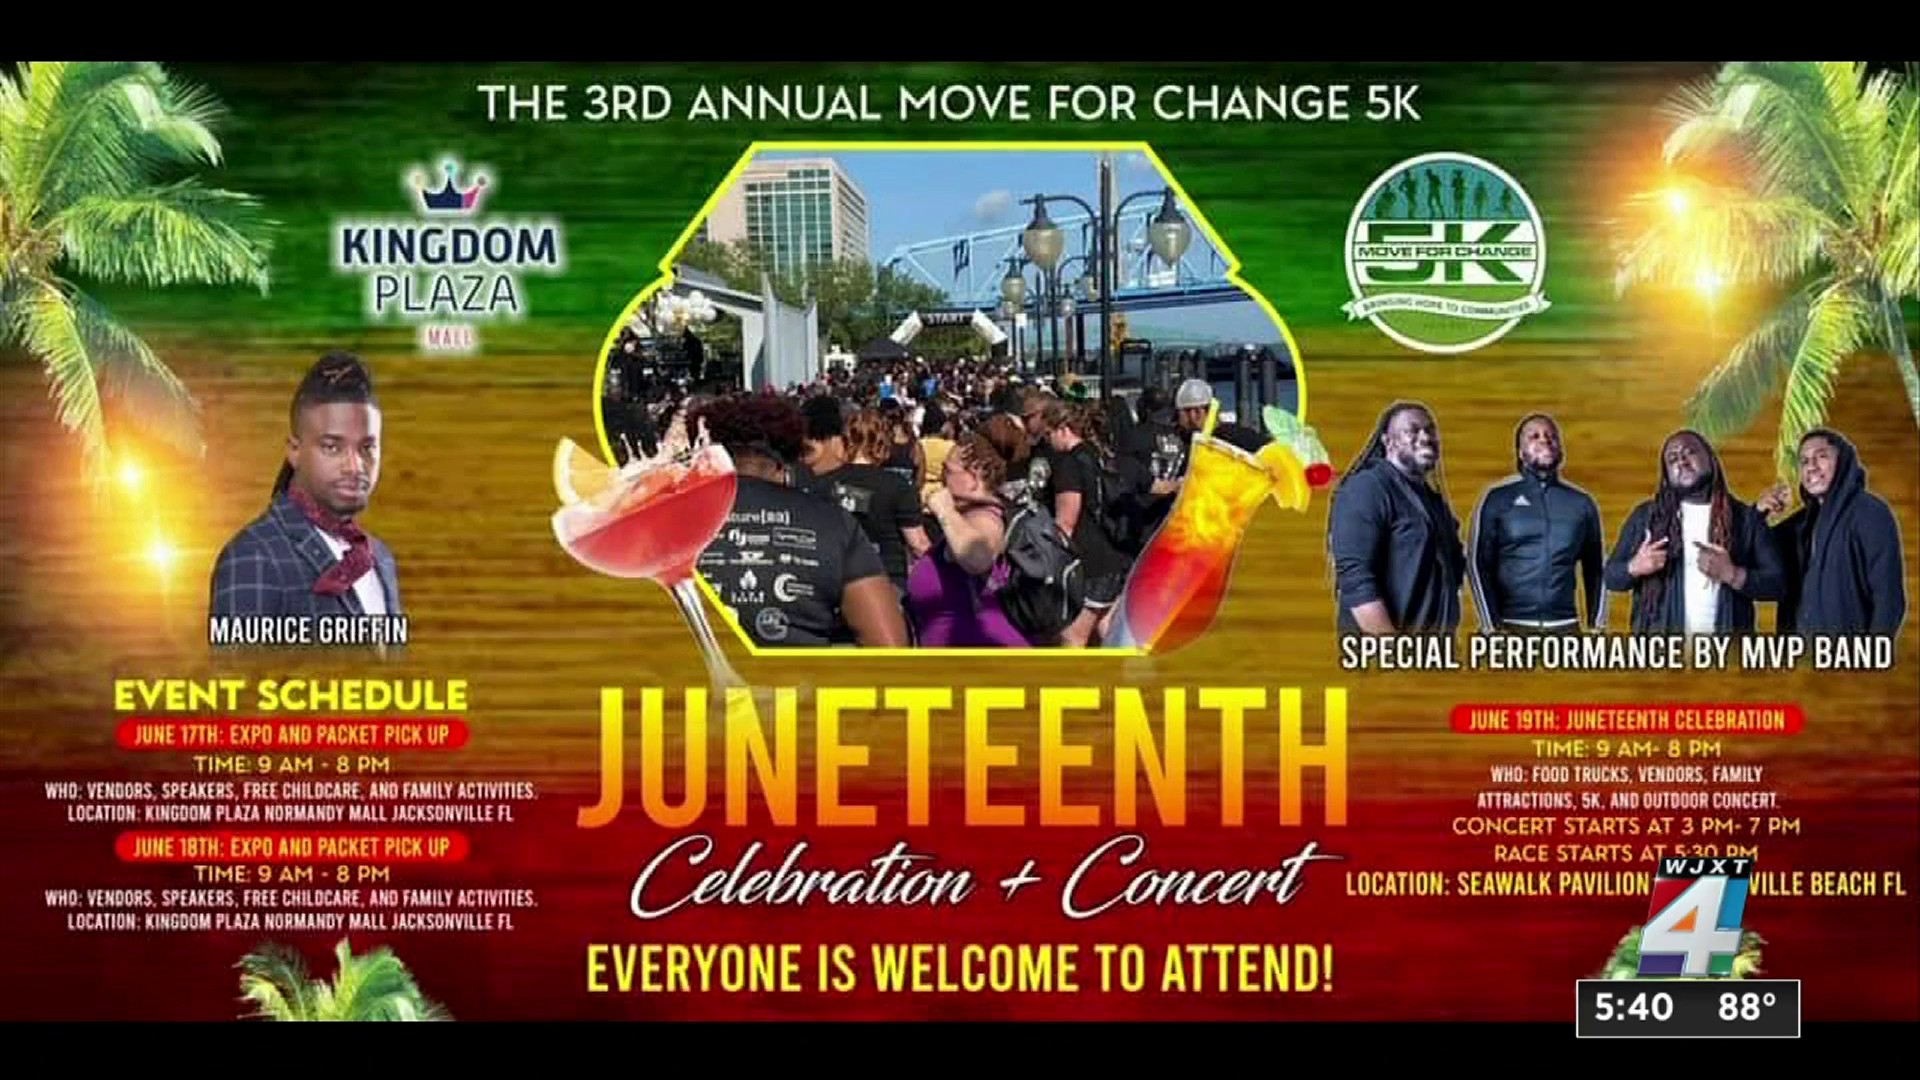 MORE Advertising - Celebrate #Juneteenth at Fenway Park this